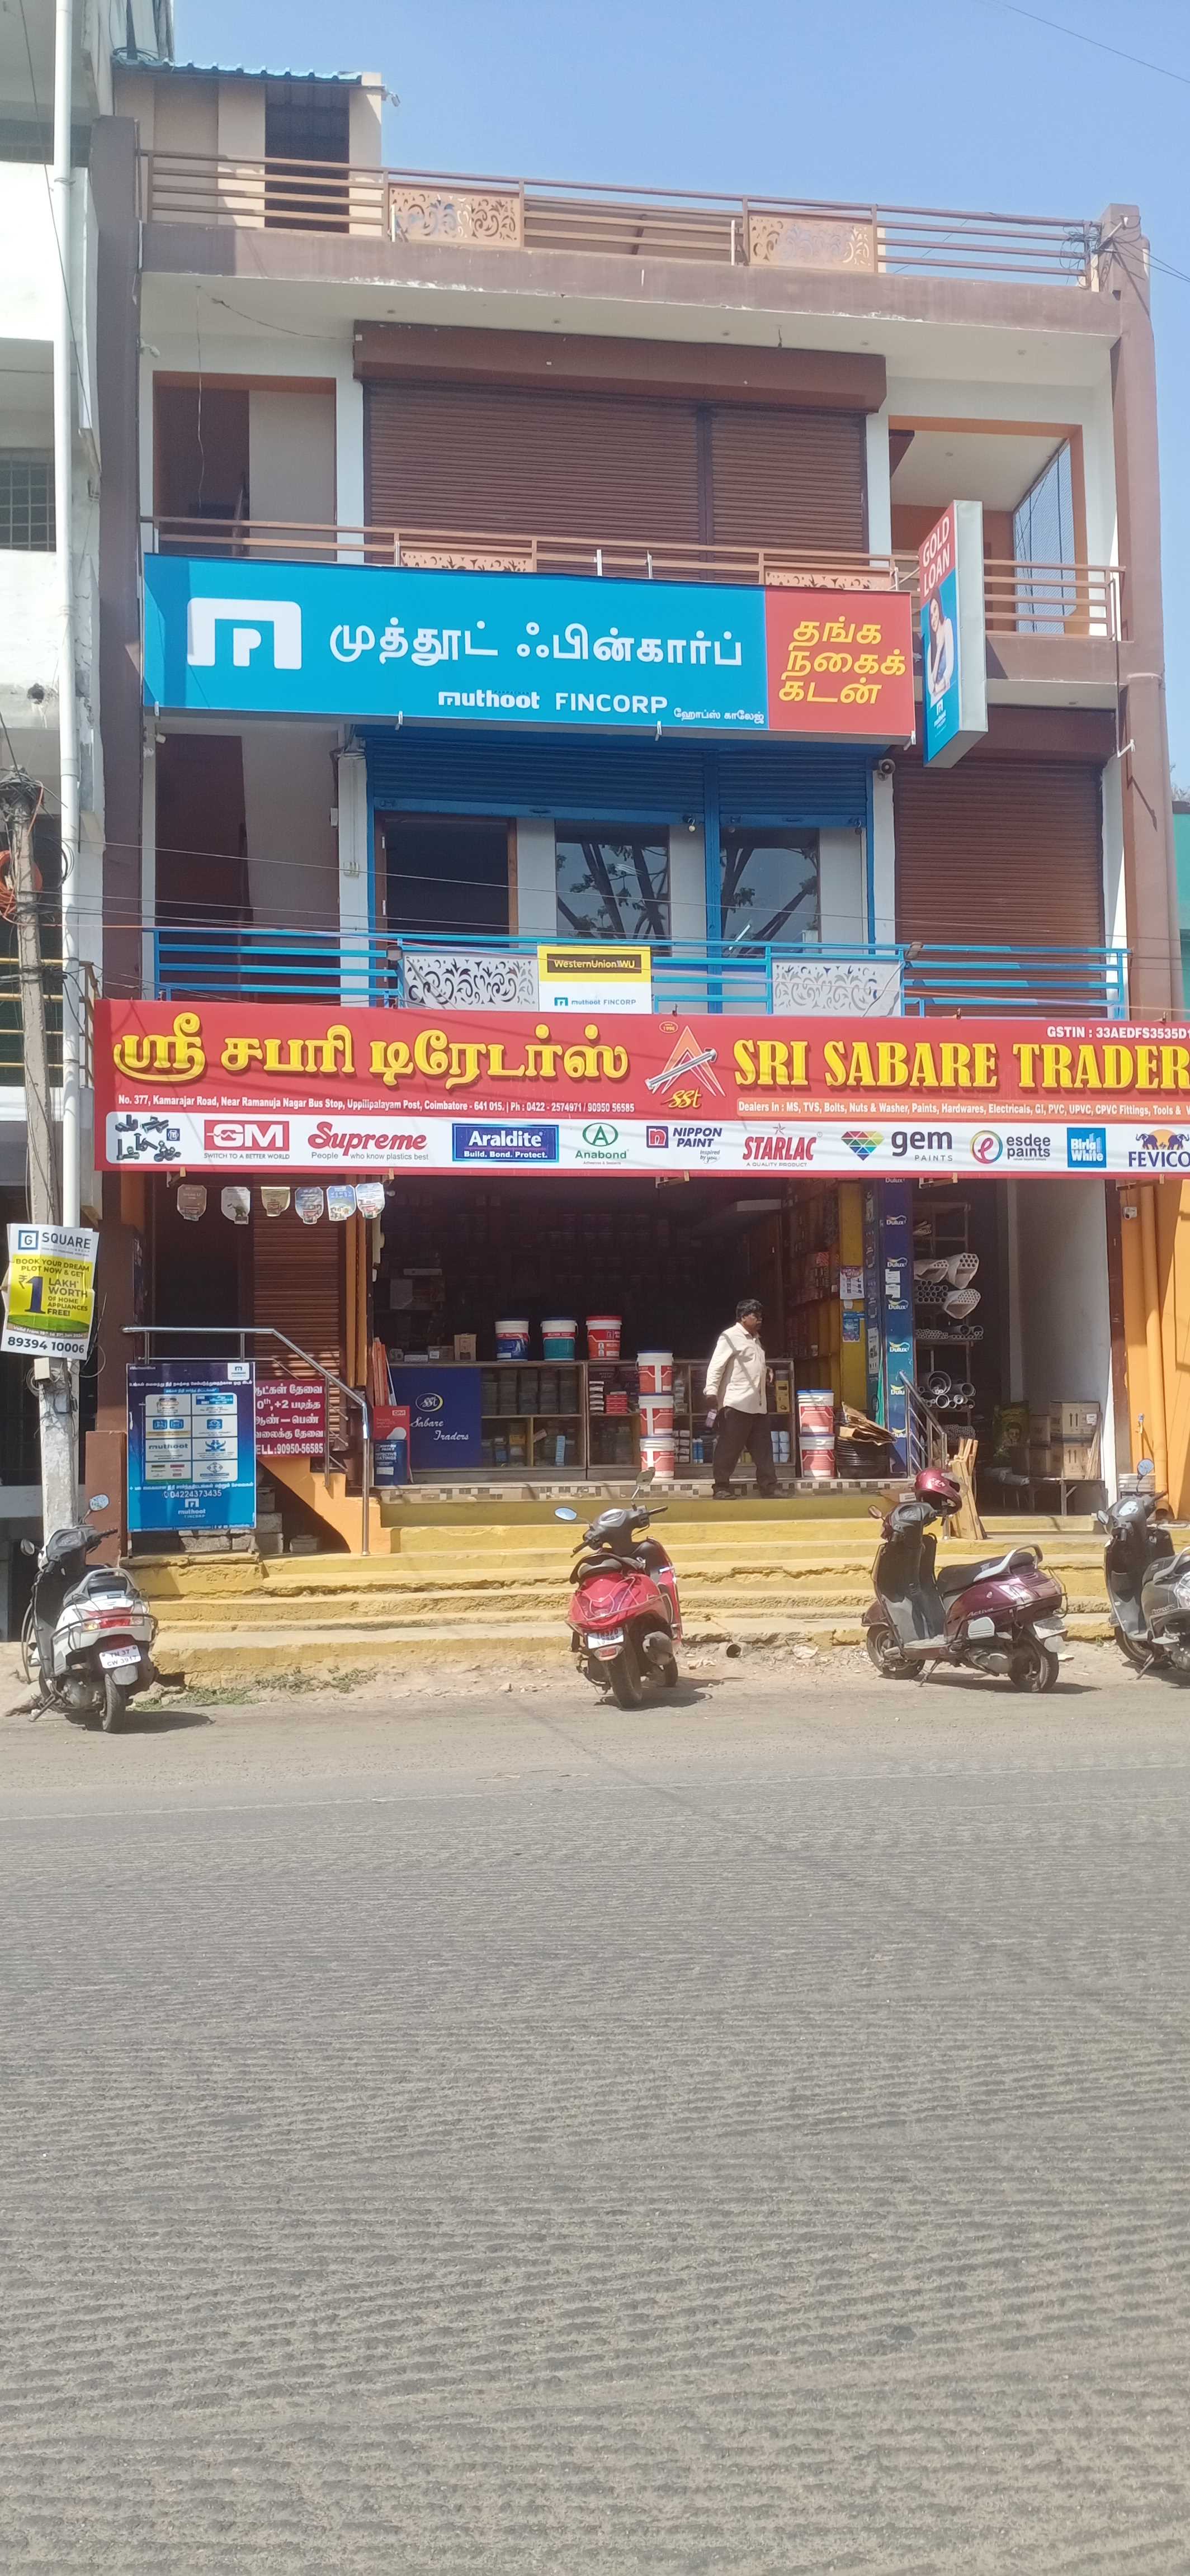 Photos and Videos of Muthoot Fincorp Gold Loan in Uppilipalayam, Coimbatore